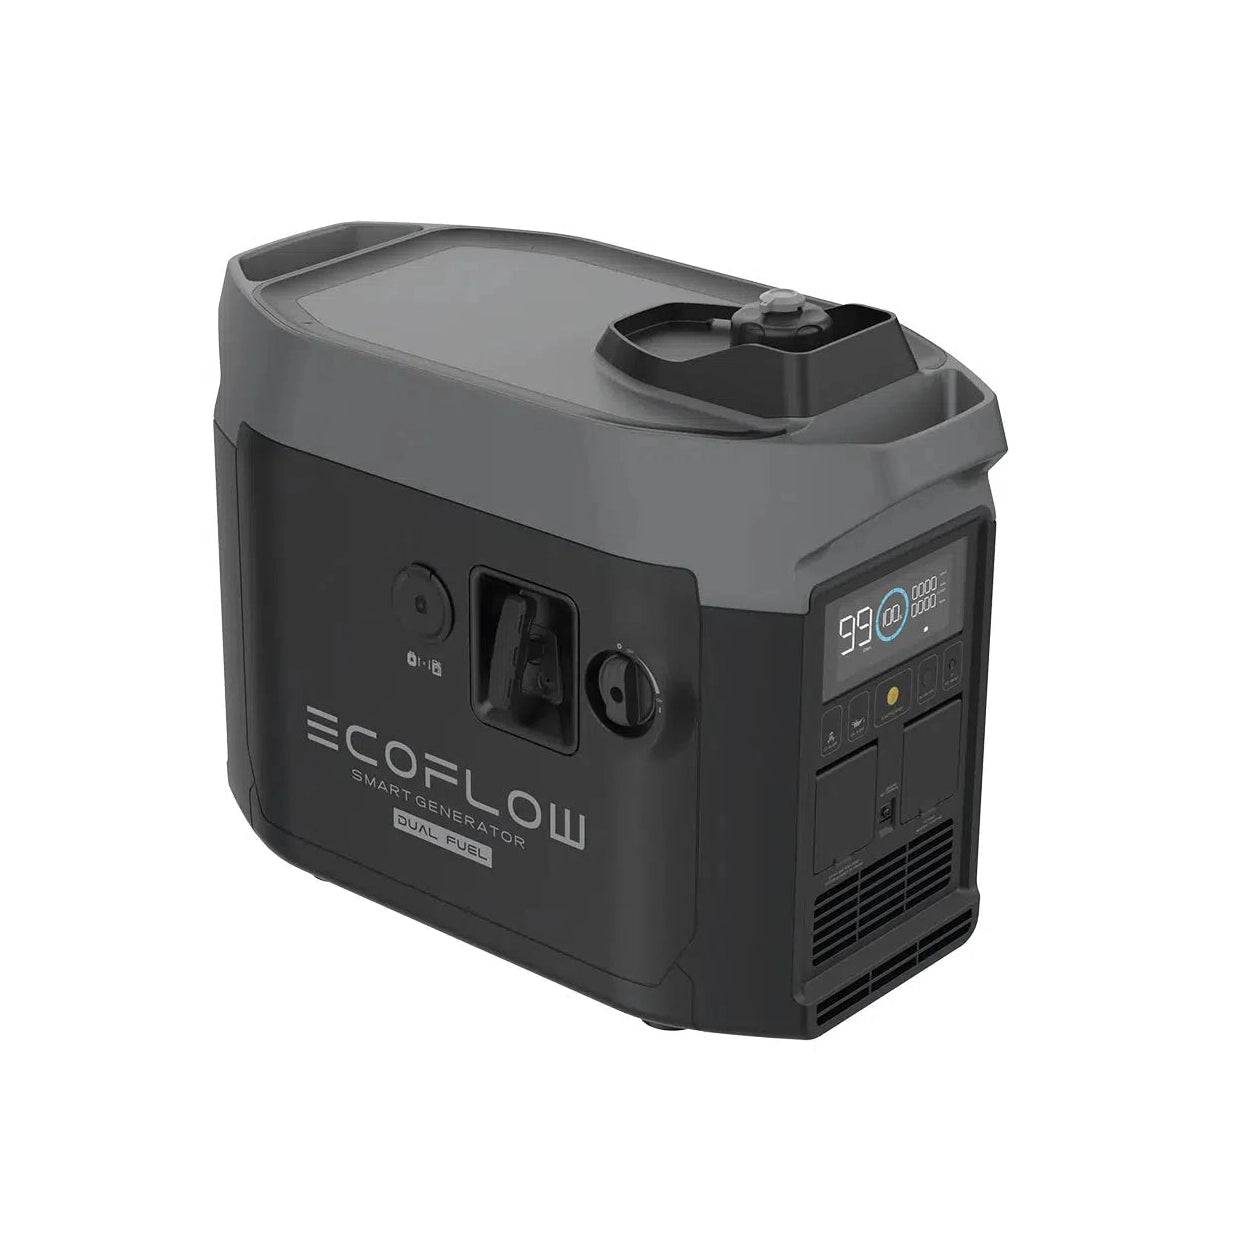 EcoFlow EcoFlow Smart Generator (Dual Fuel) Integrates with DELTA Pro/Max or Power Kits Automatically - eBike Haul